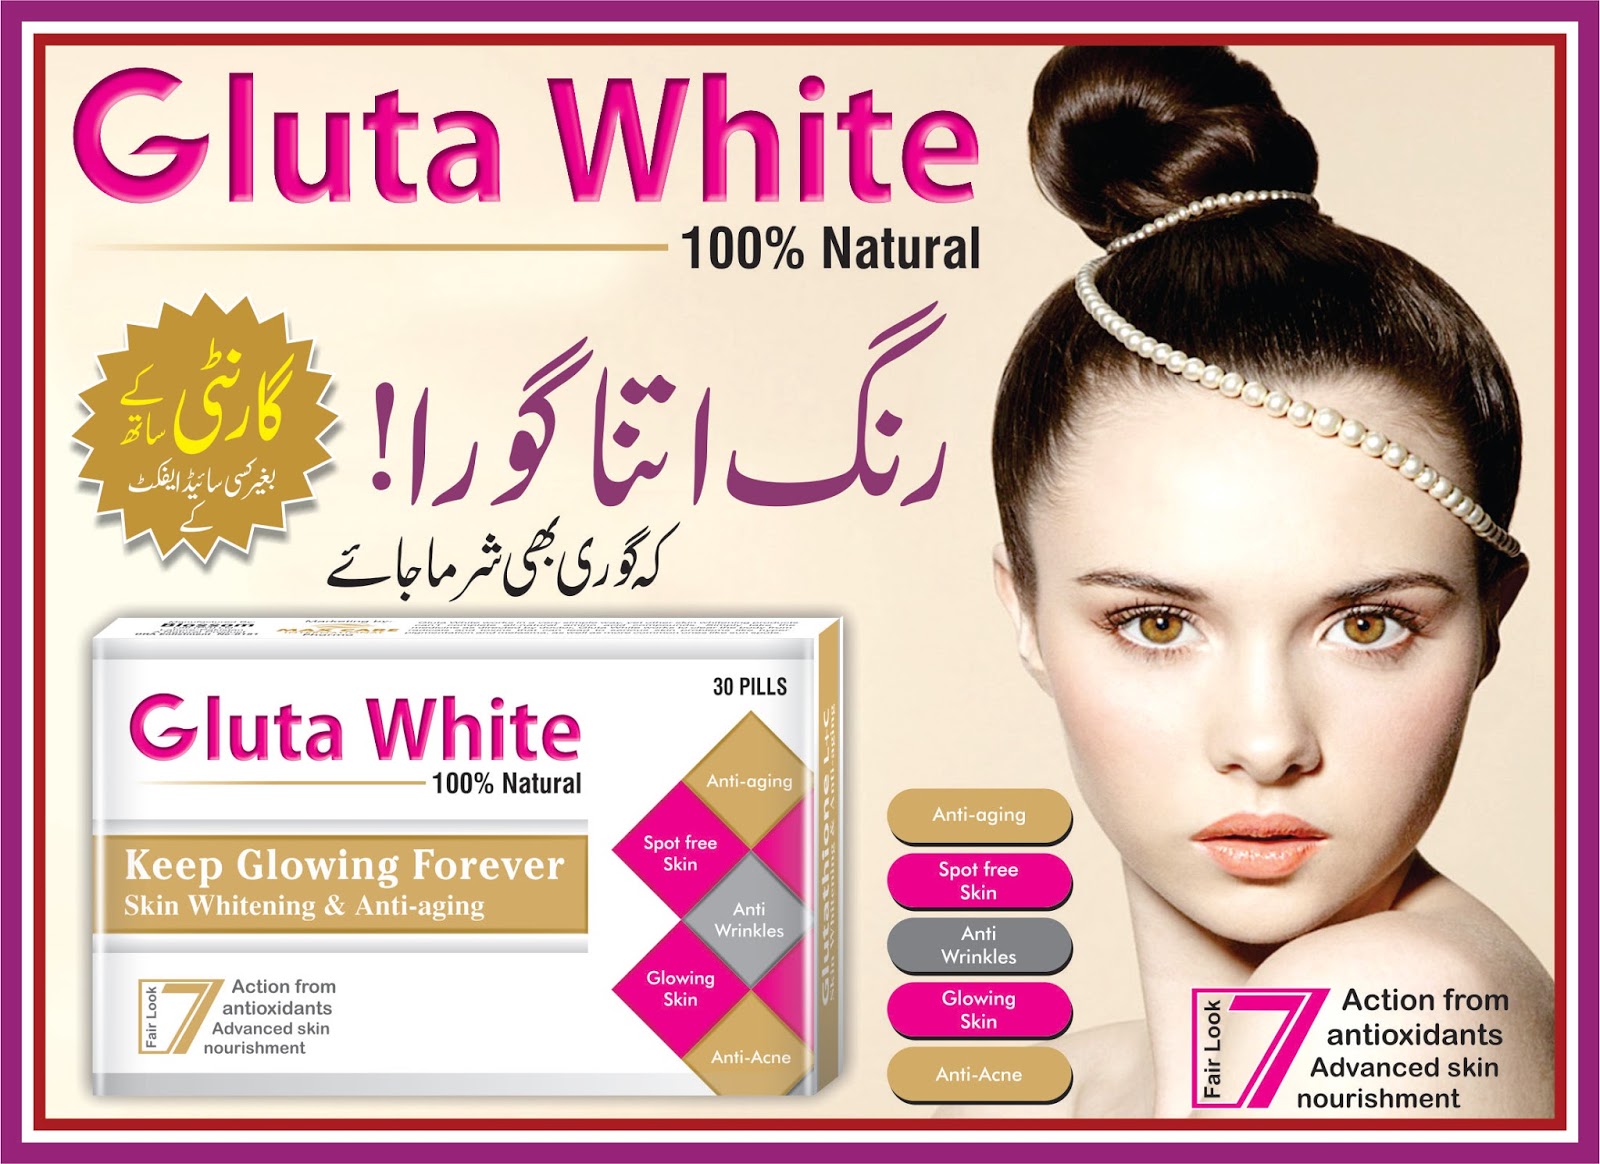 white skin whitening tablets- effective antiaging and whitening 